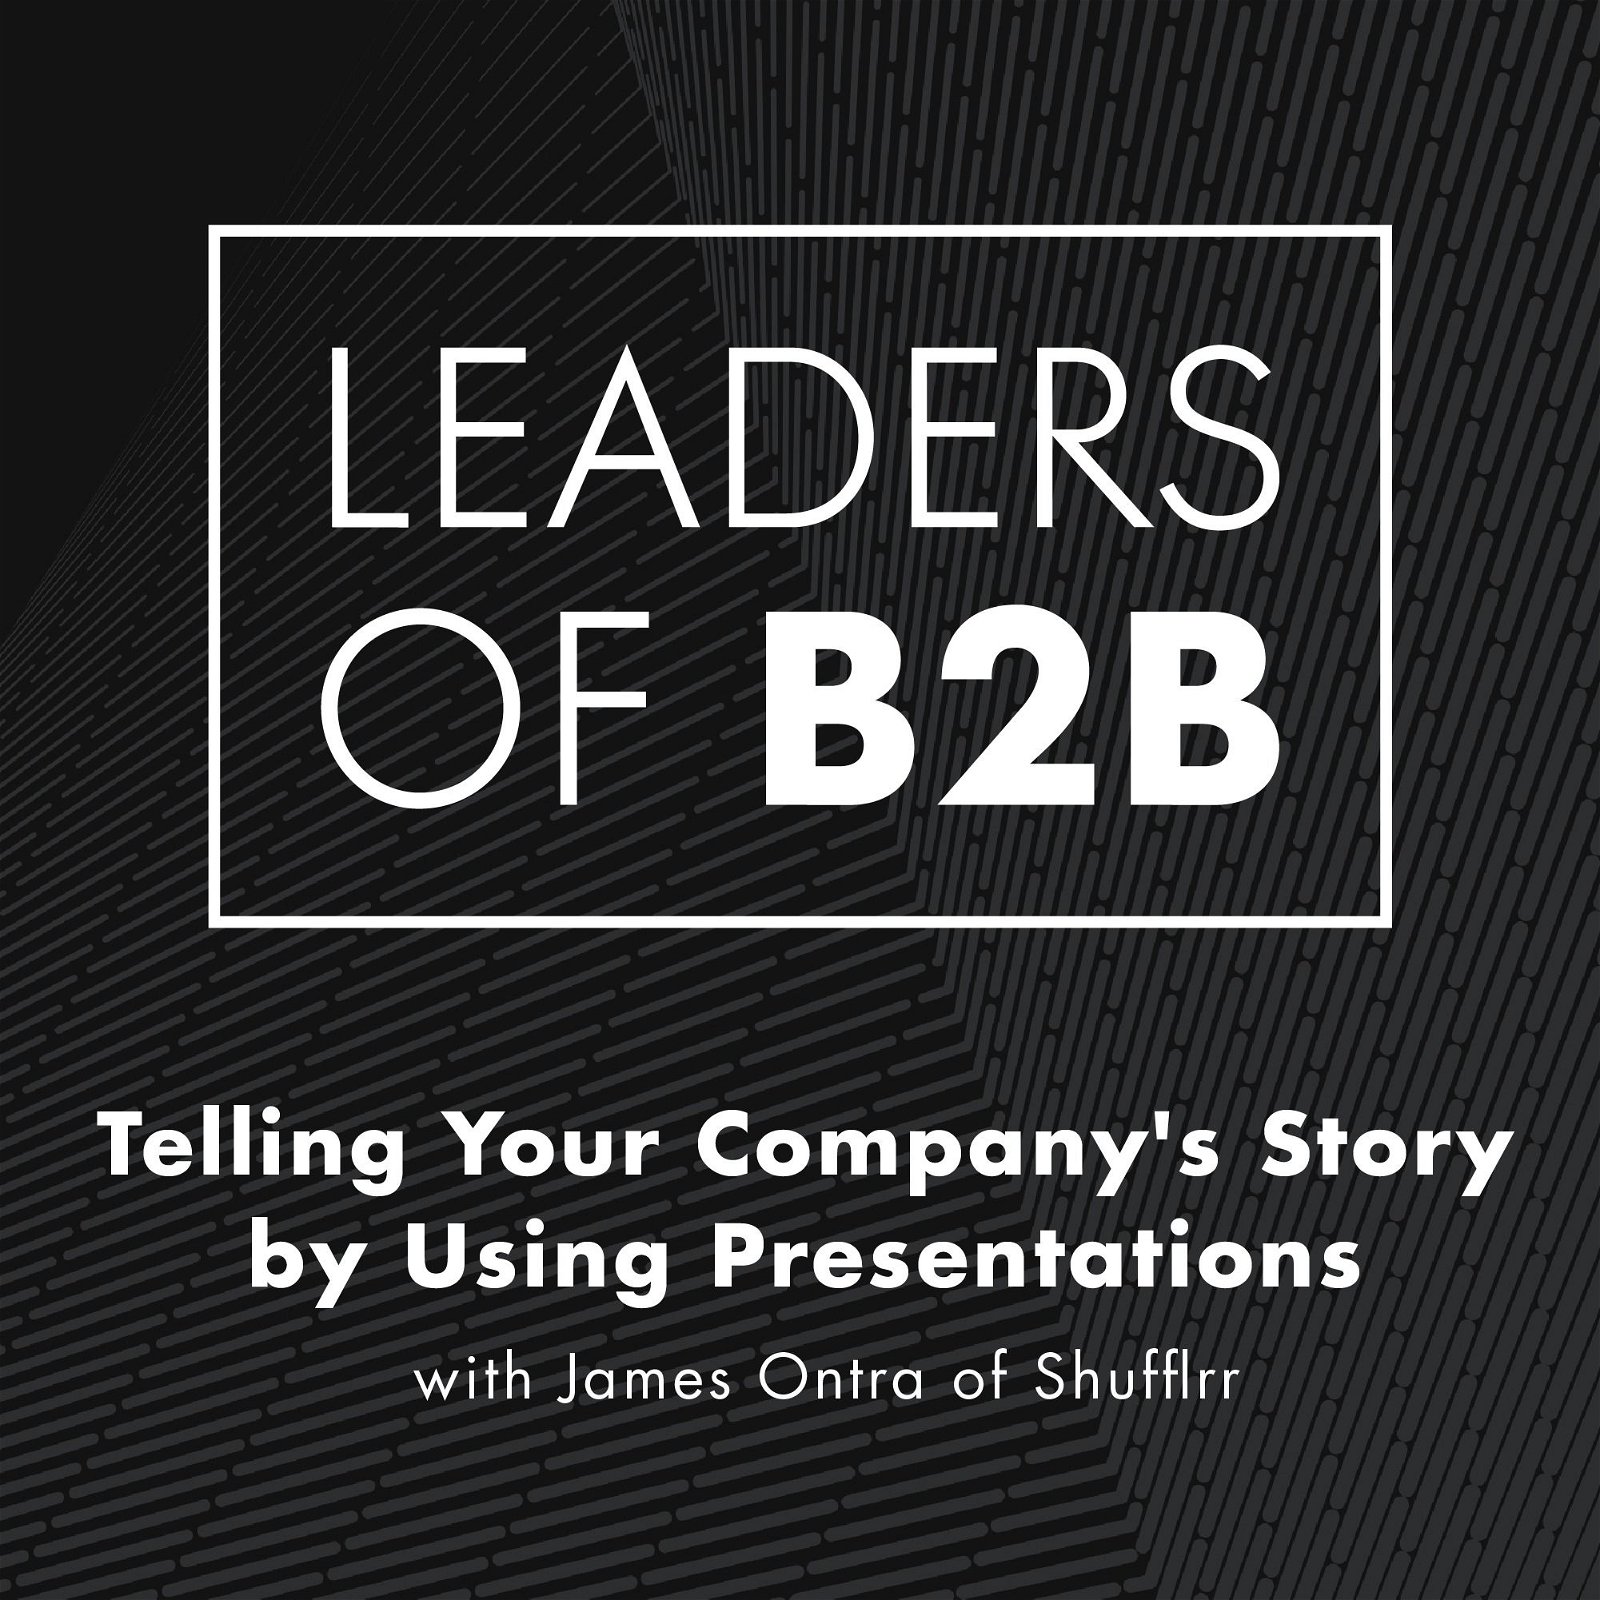 Telling Your Company's Story By Using Presentations with James Ontra of Shufflrr